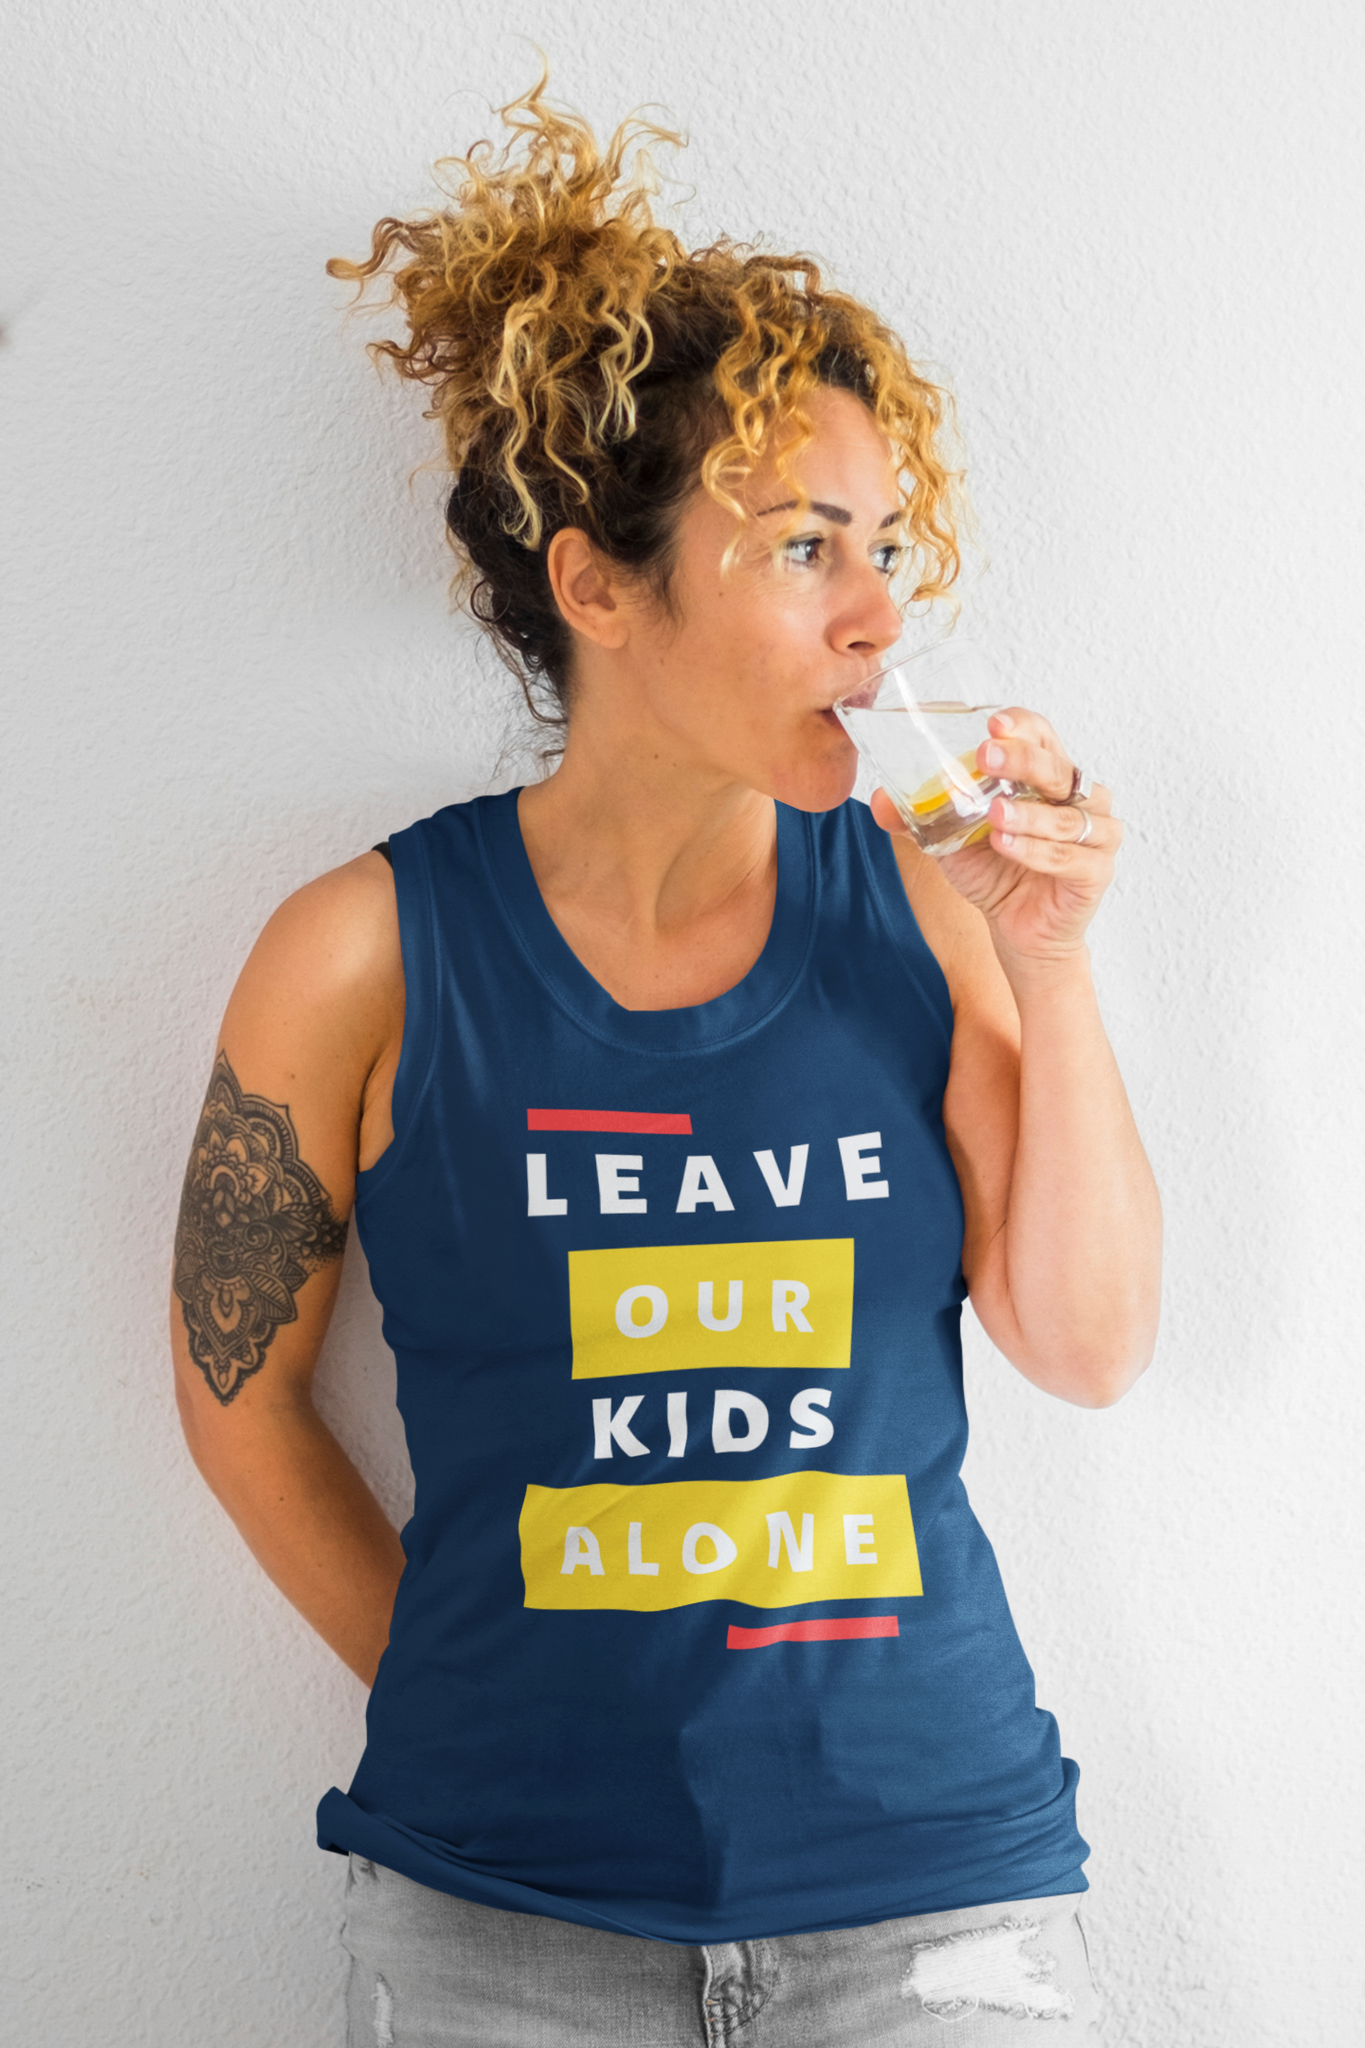 Leave Our Kids Alone Tank Top Women